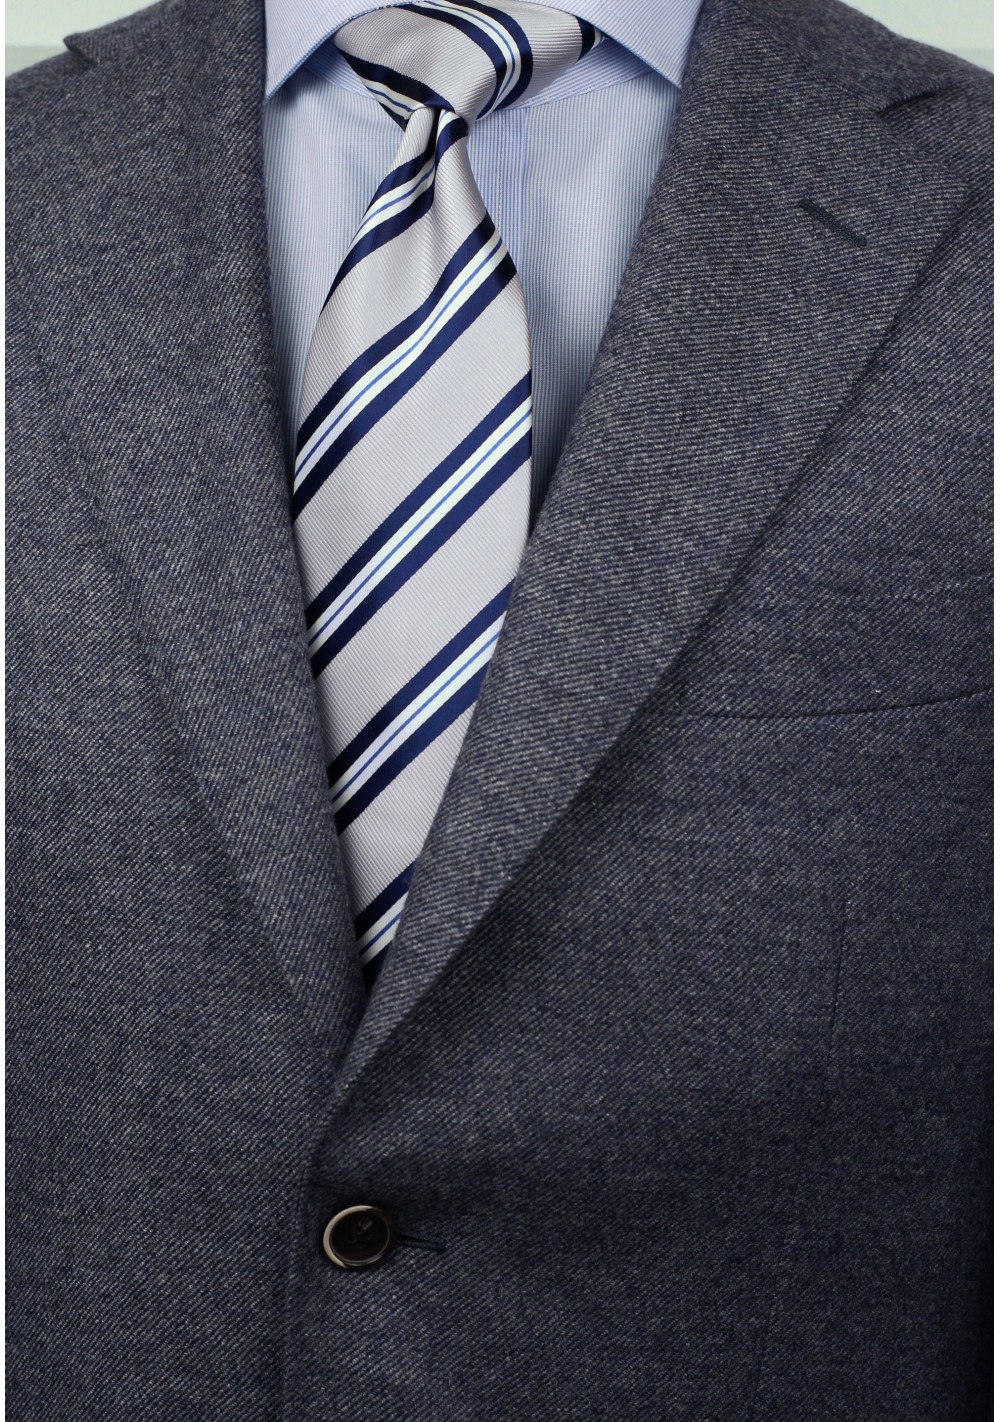 Preppy Repp Necktie in Silver, Blue, and White | Bows-N-Ties.com